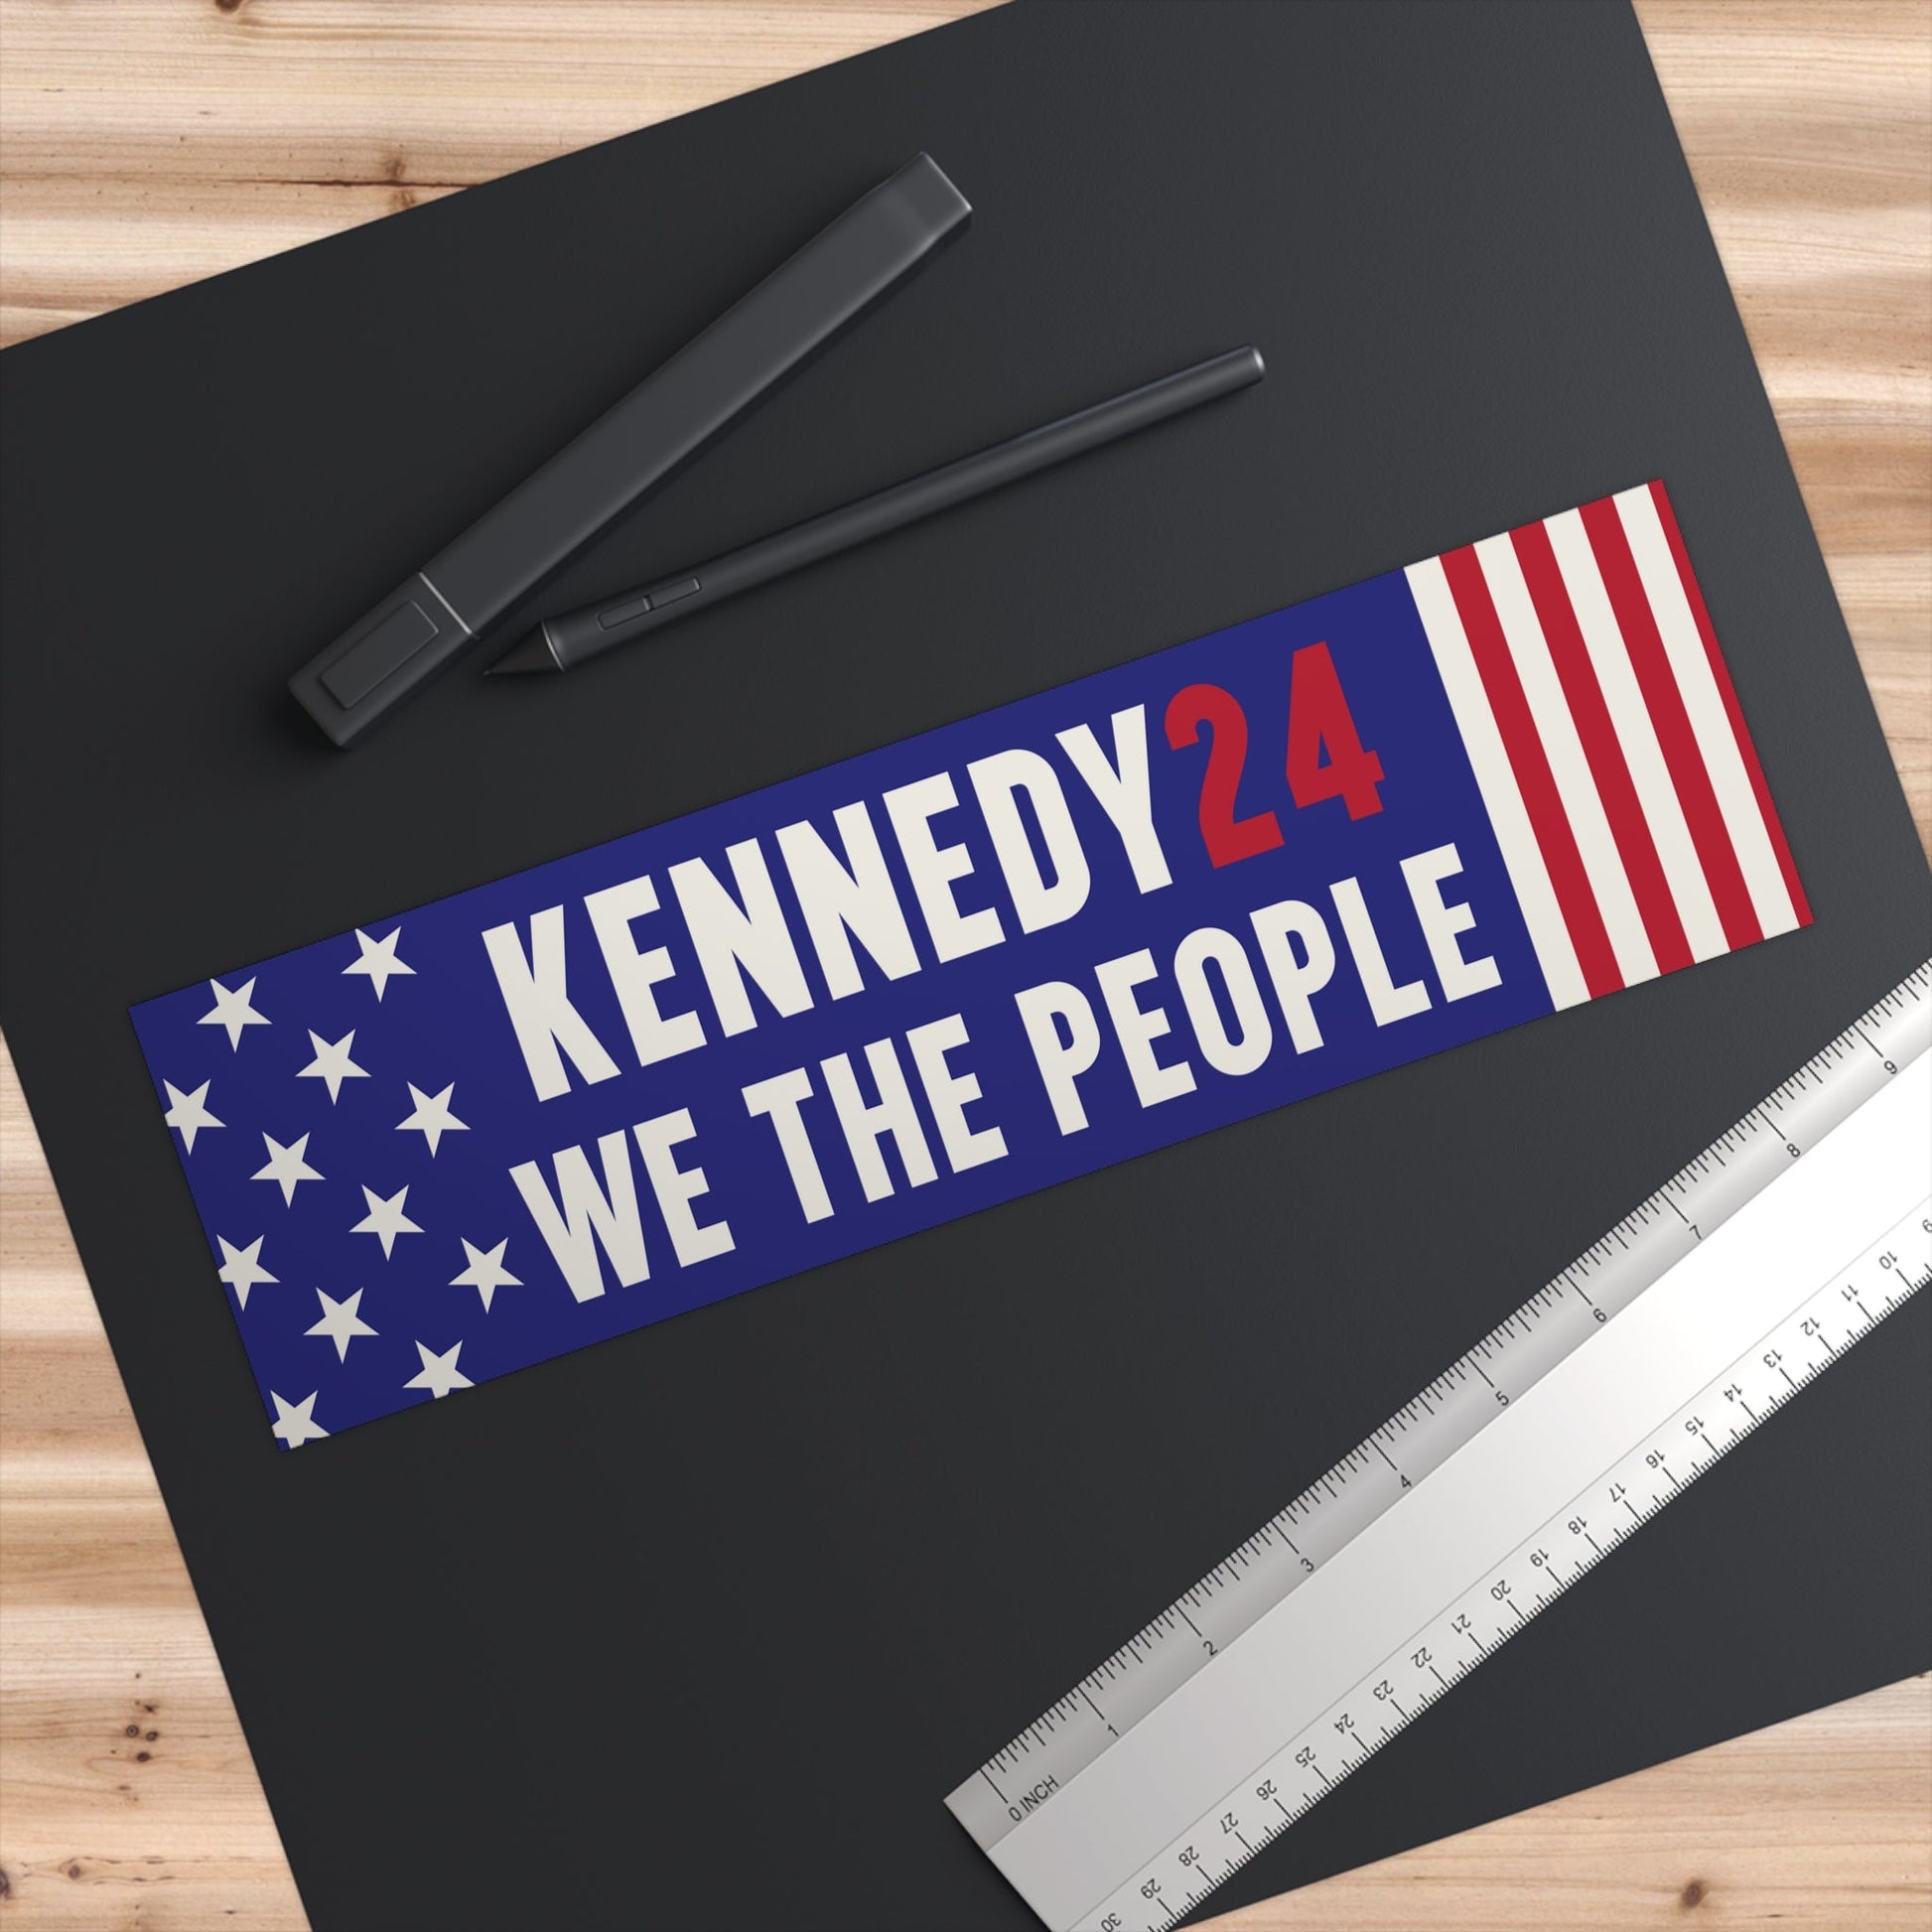 Kennedy24 We the People Bumper Sticker - TEAM KENNEDY. All rights reserved